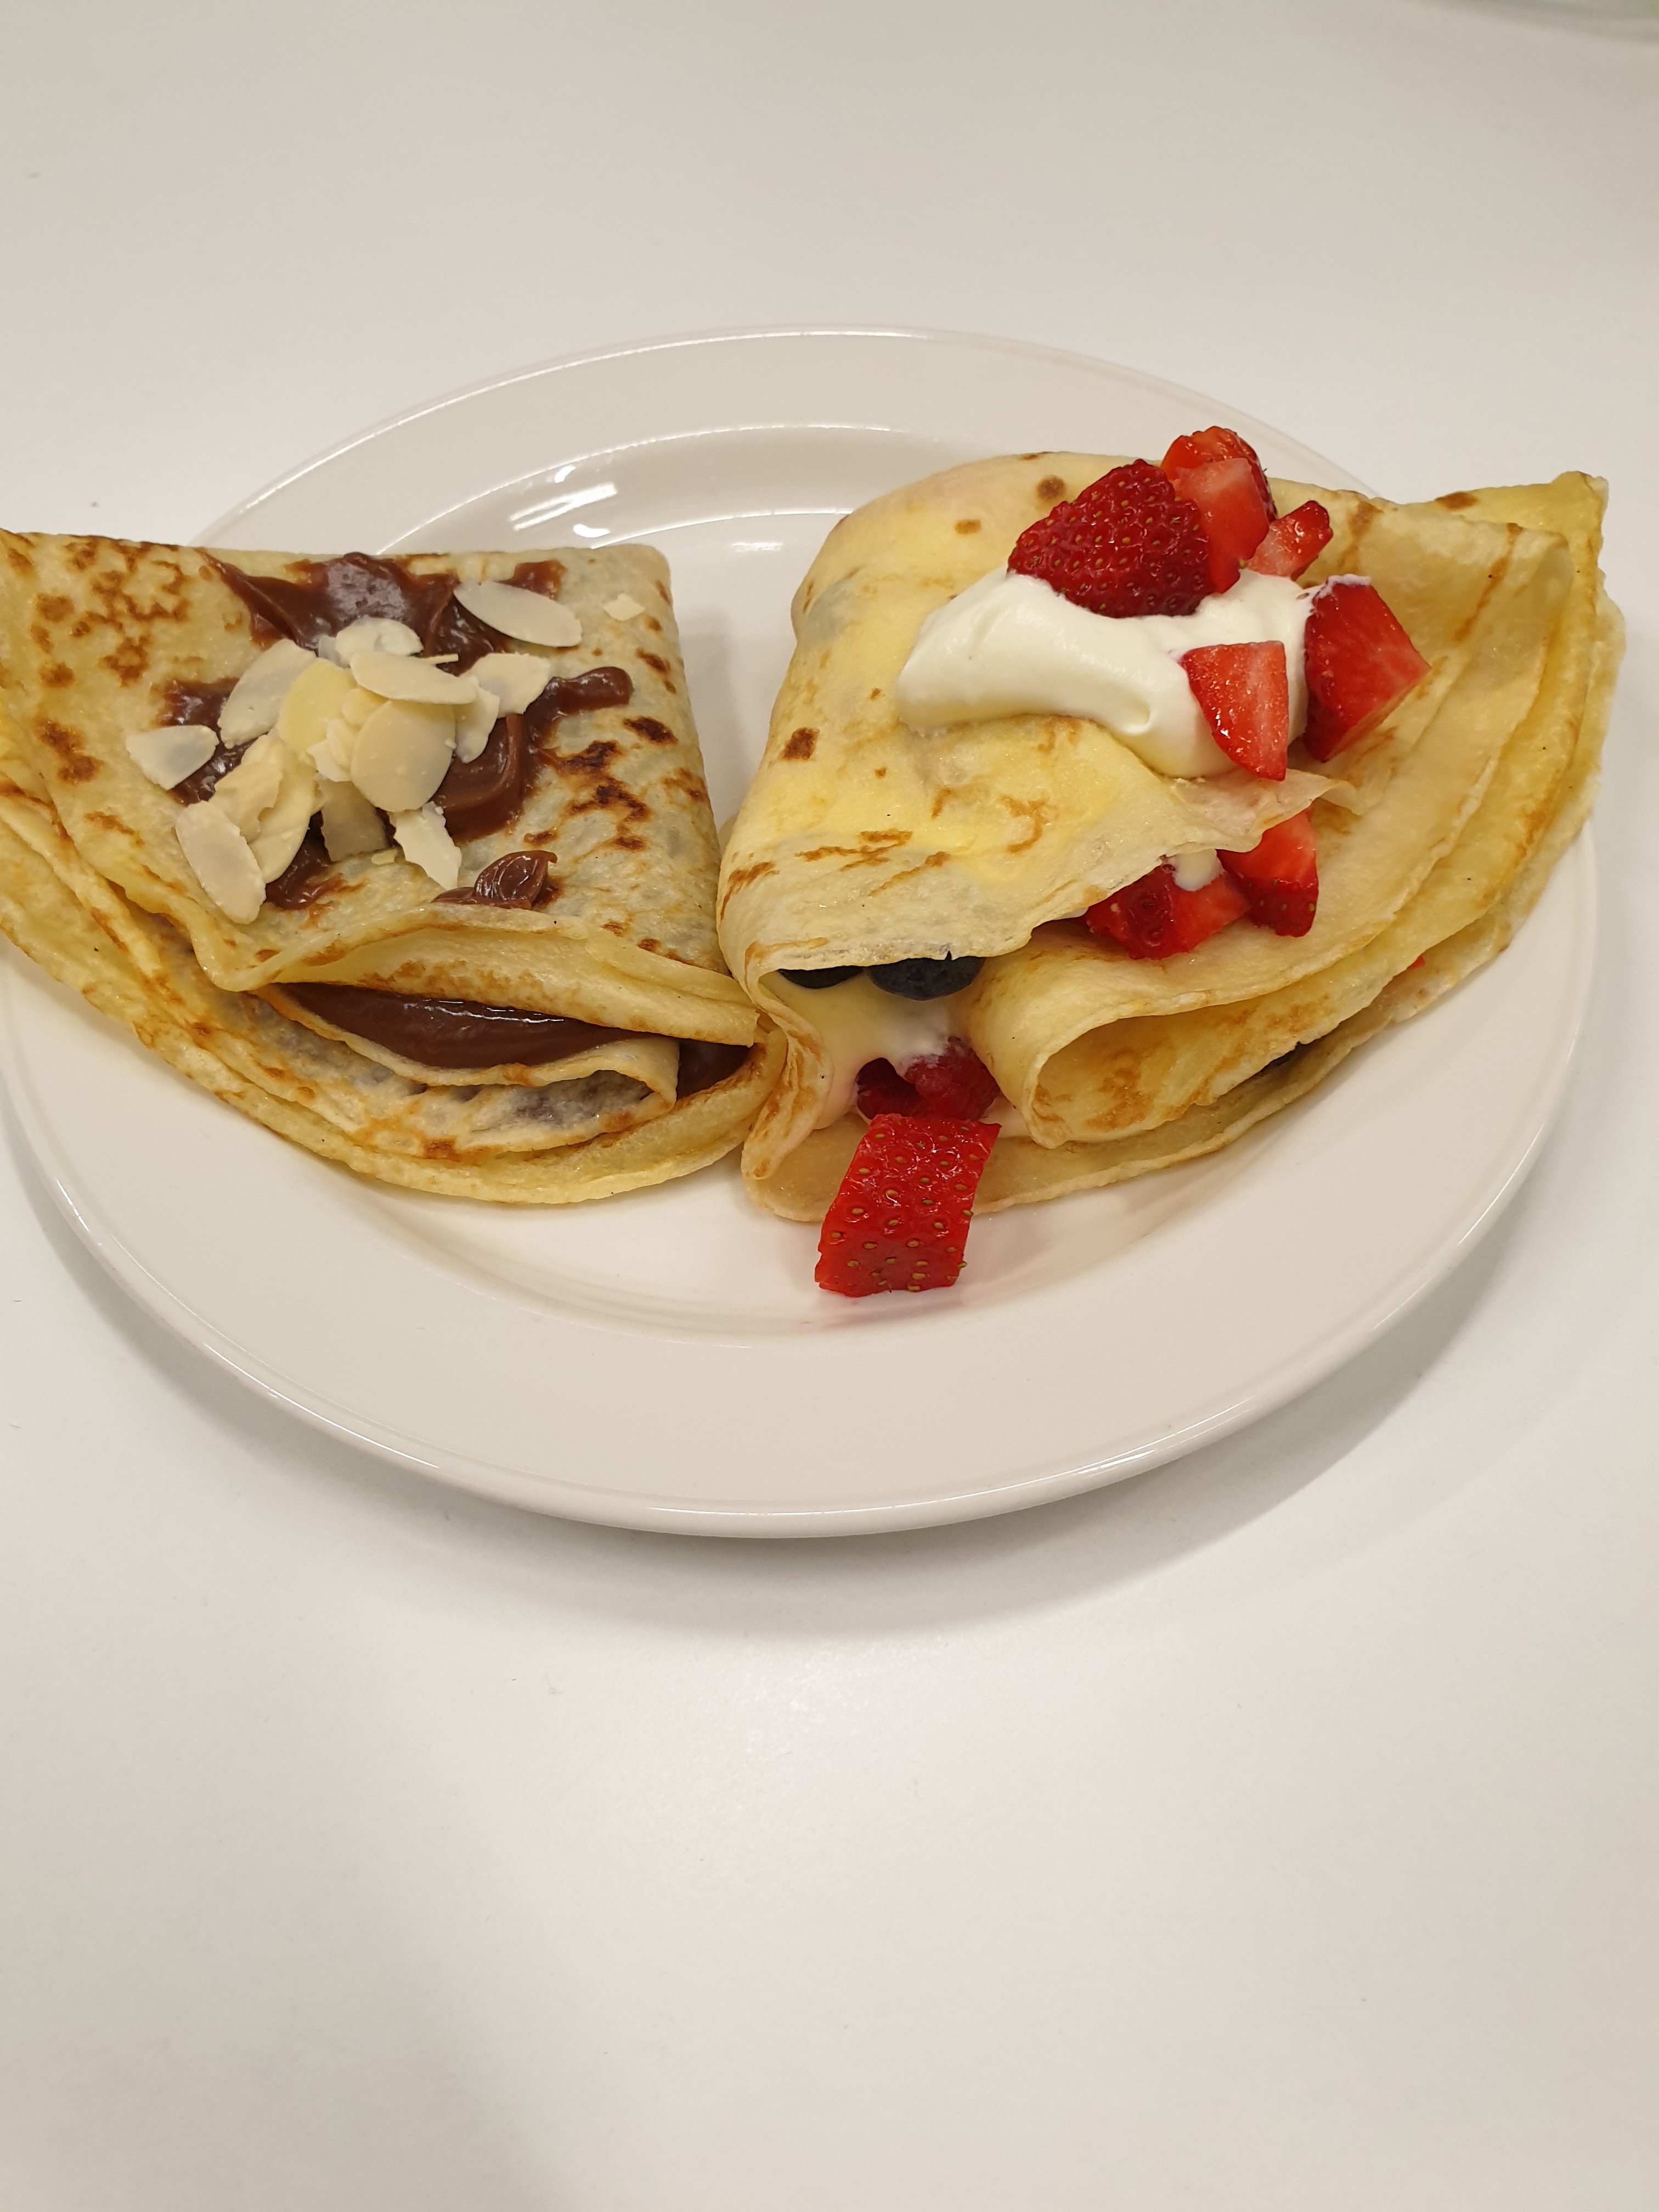 Happy pancake day! – Dr.Franny and Mrs.Myself